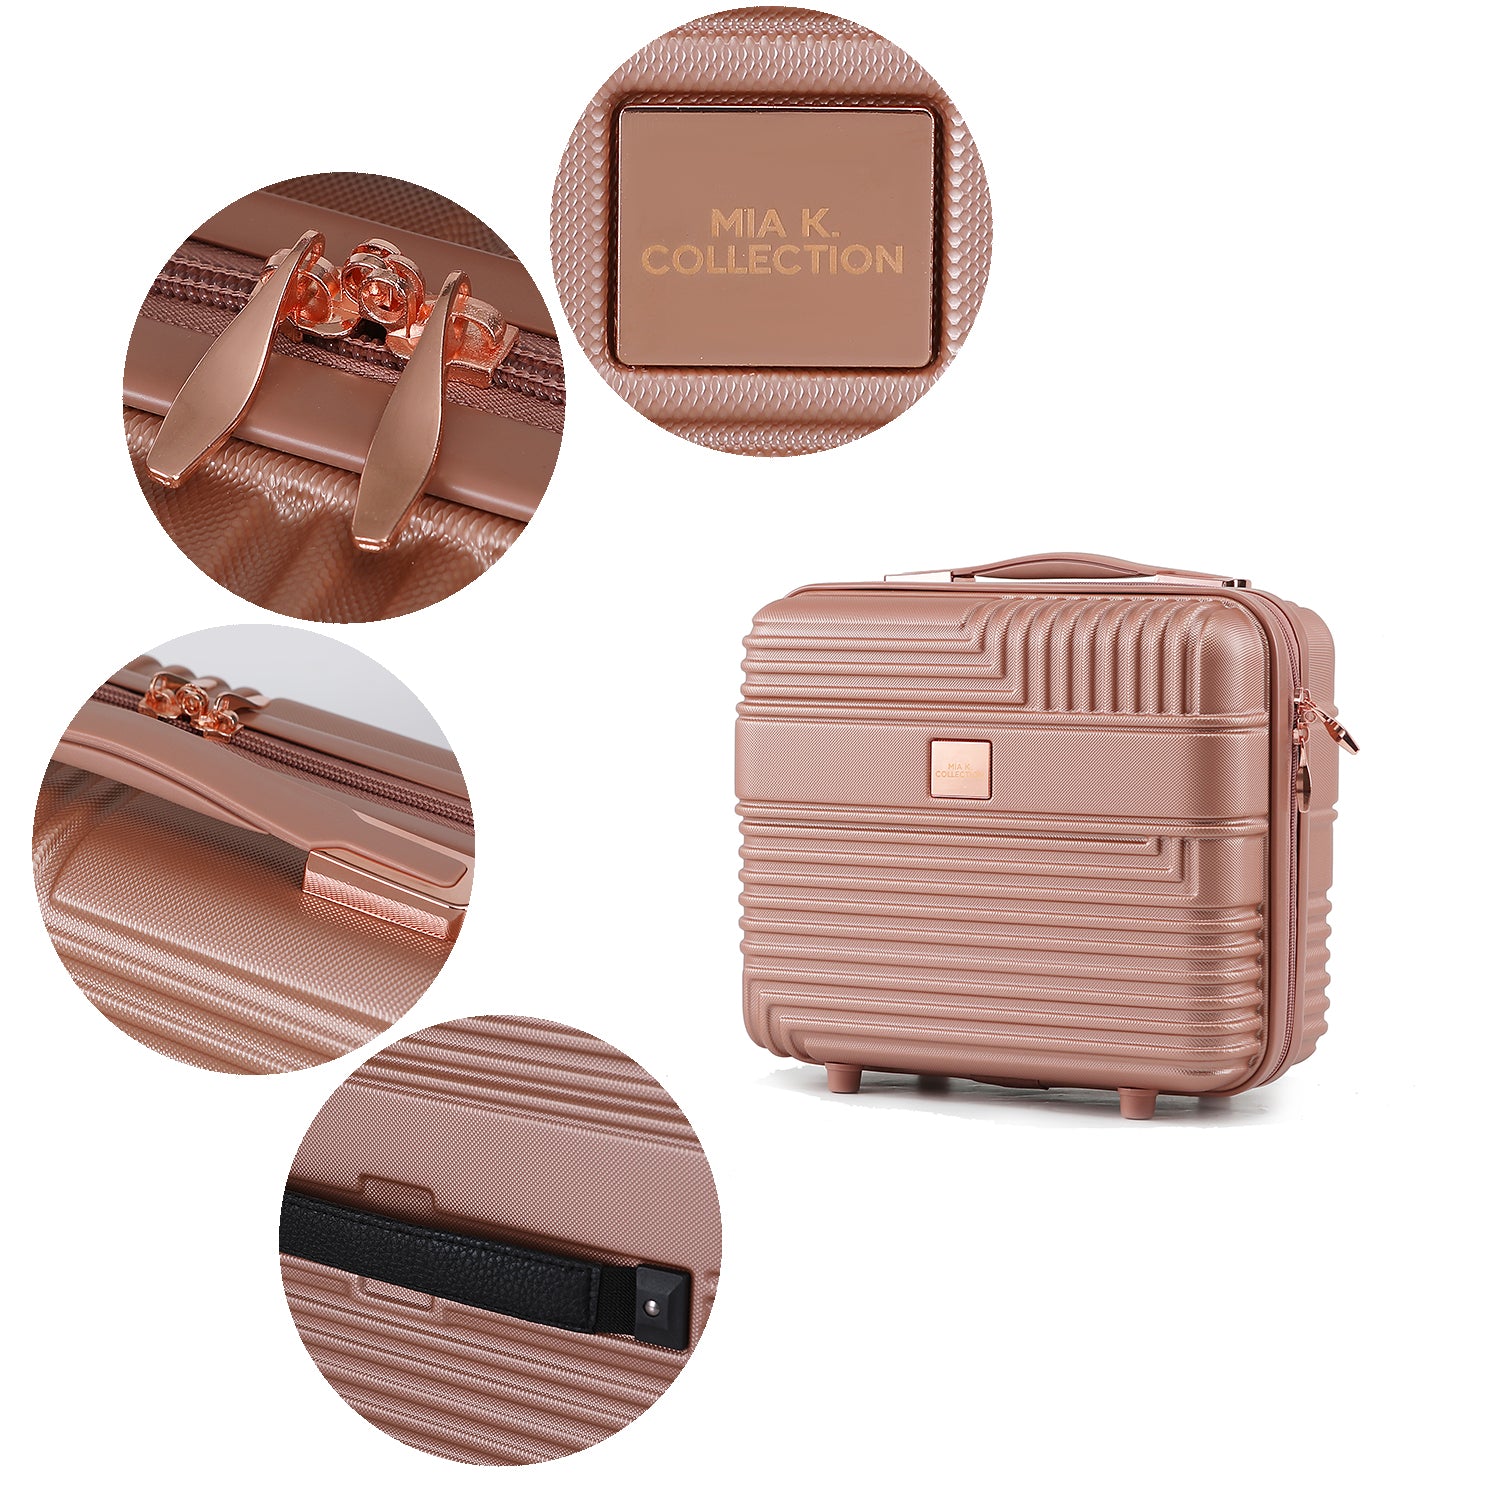 Mykonos Luggage Set- Large and Medium Check-in Carry-on and Cosmetic